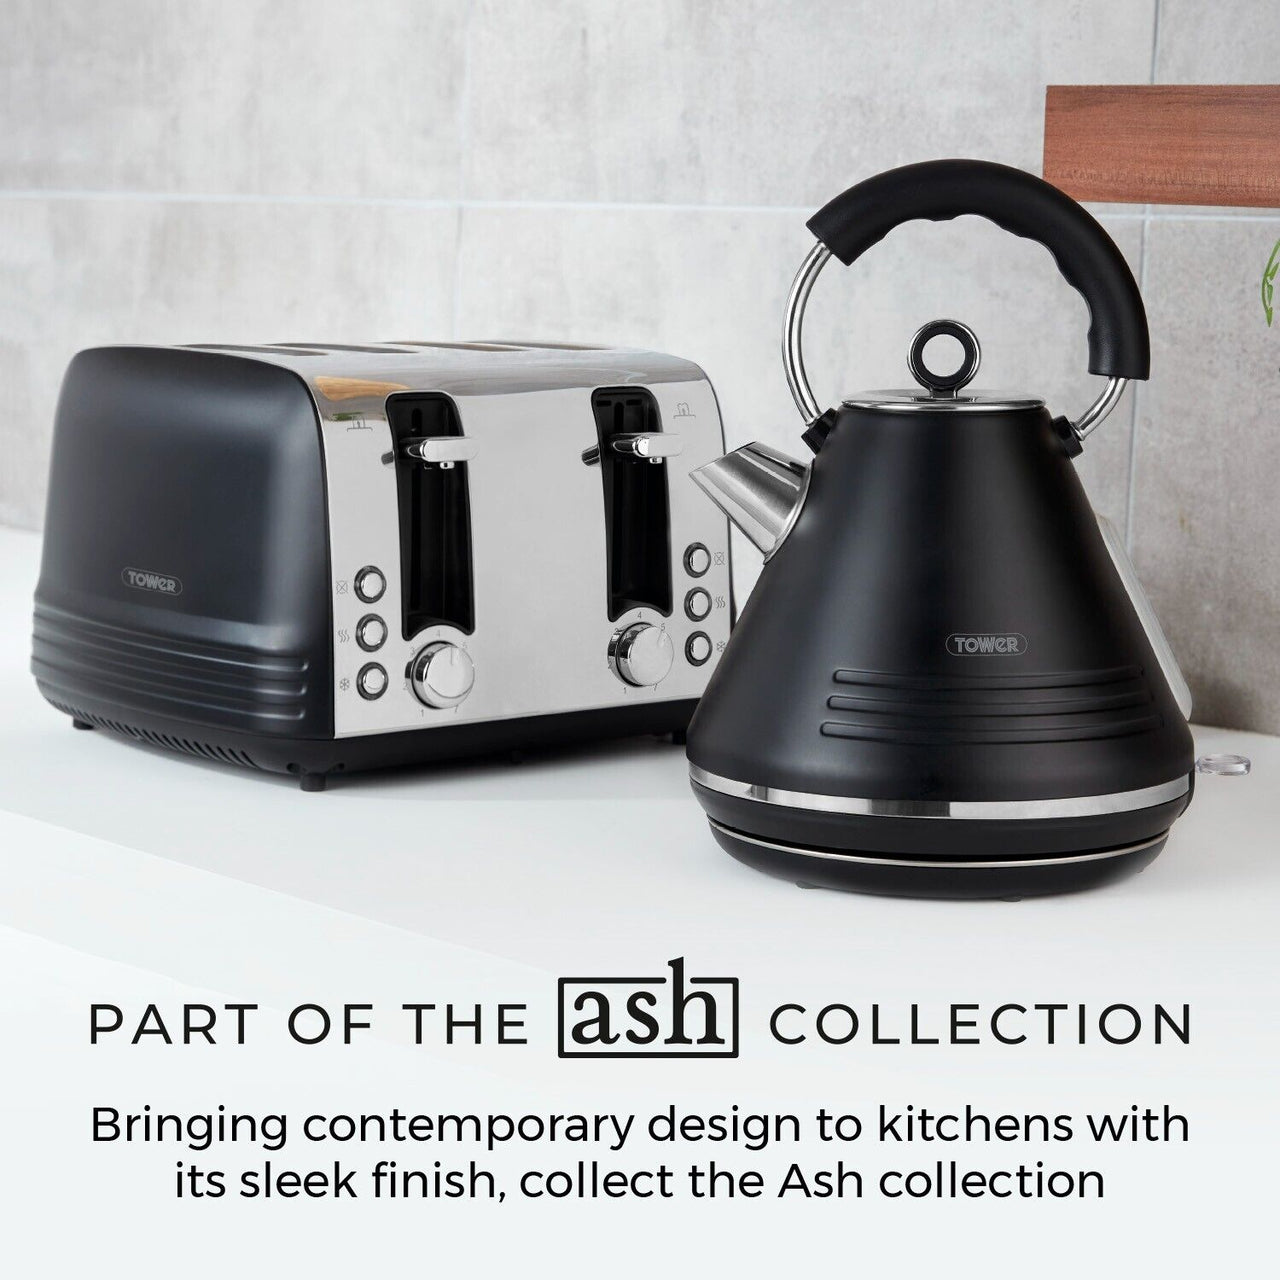 Tower Ash Black 1.7L 3KW Pyramid Kettle ,4 Slice Toaster & T24019 Infinity Microwave Matching Set